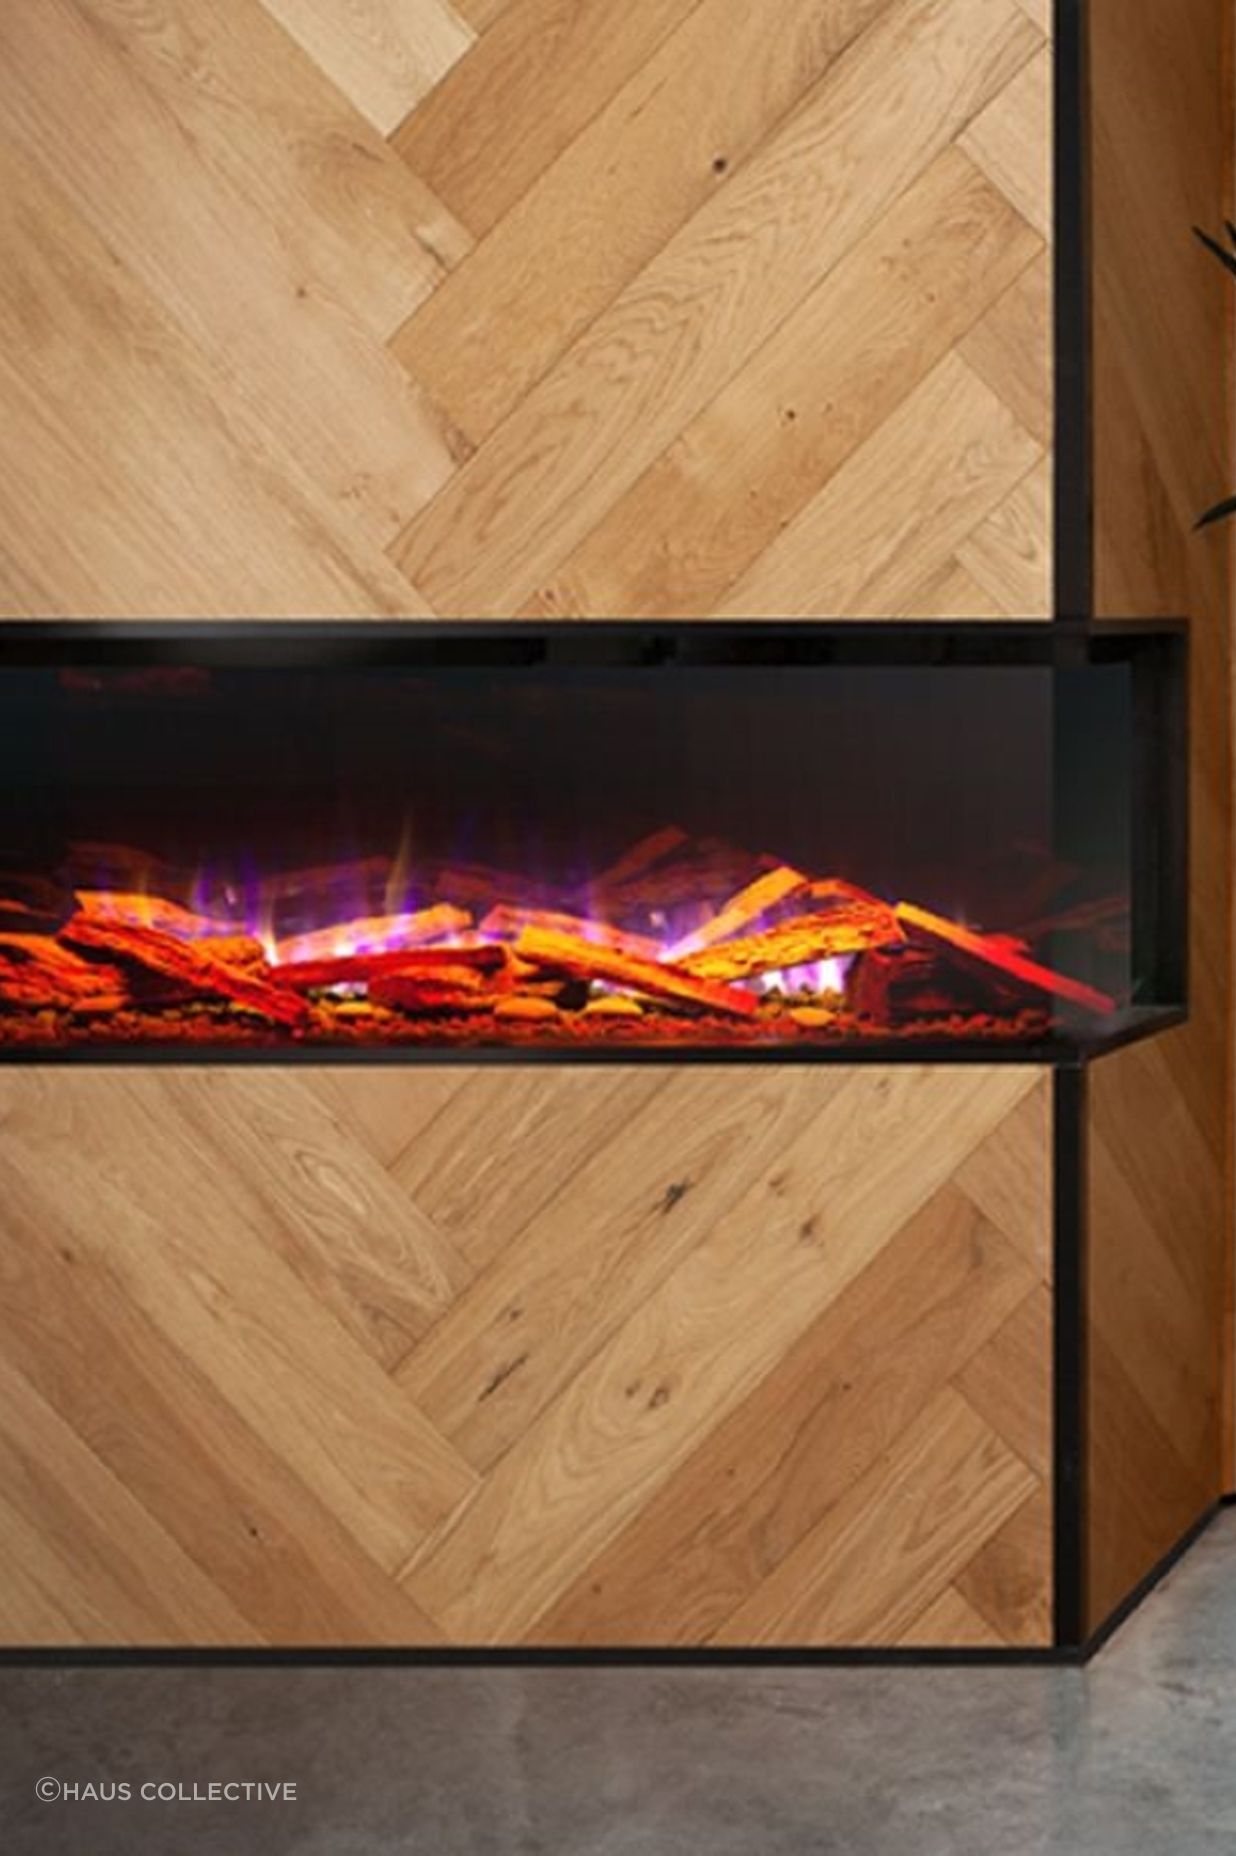 The flame intensity levels of the Visionline Electric Fireplace can be adjusted to suit your preference.